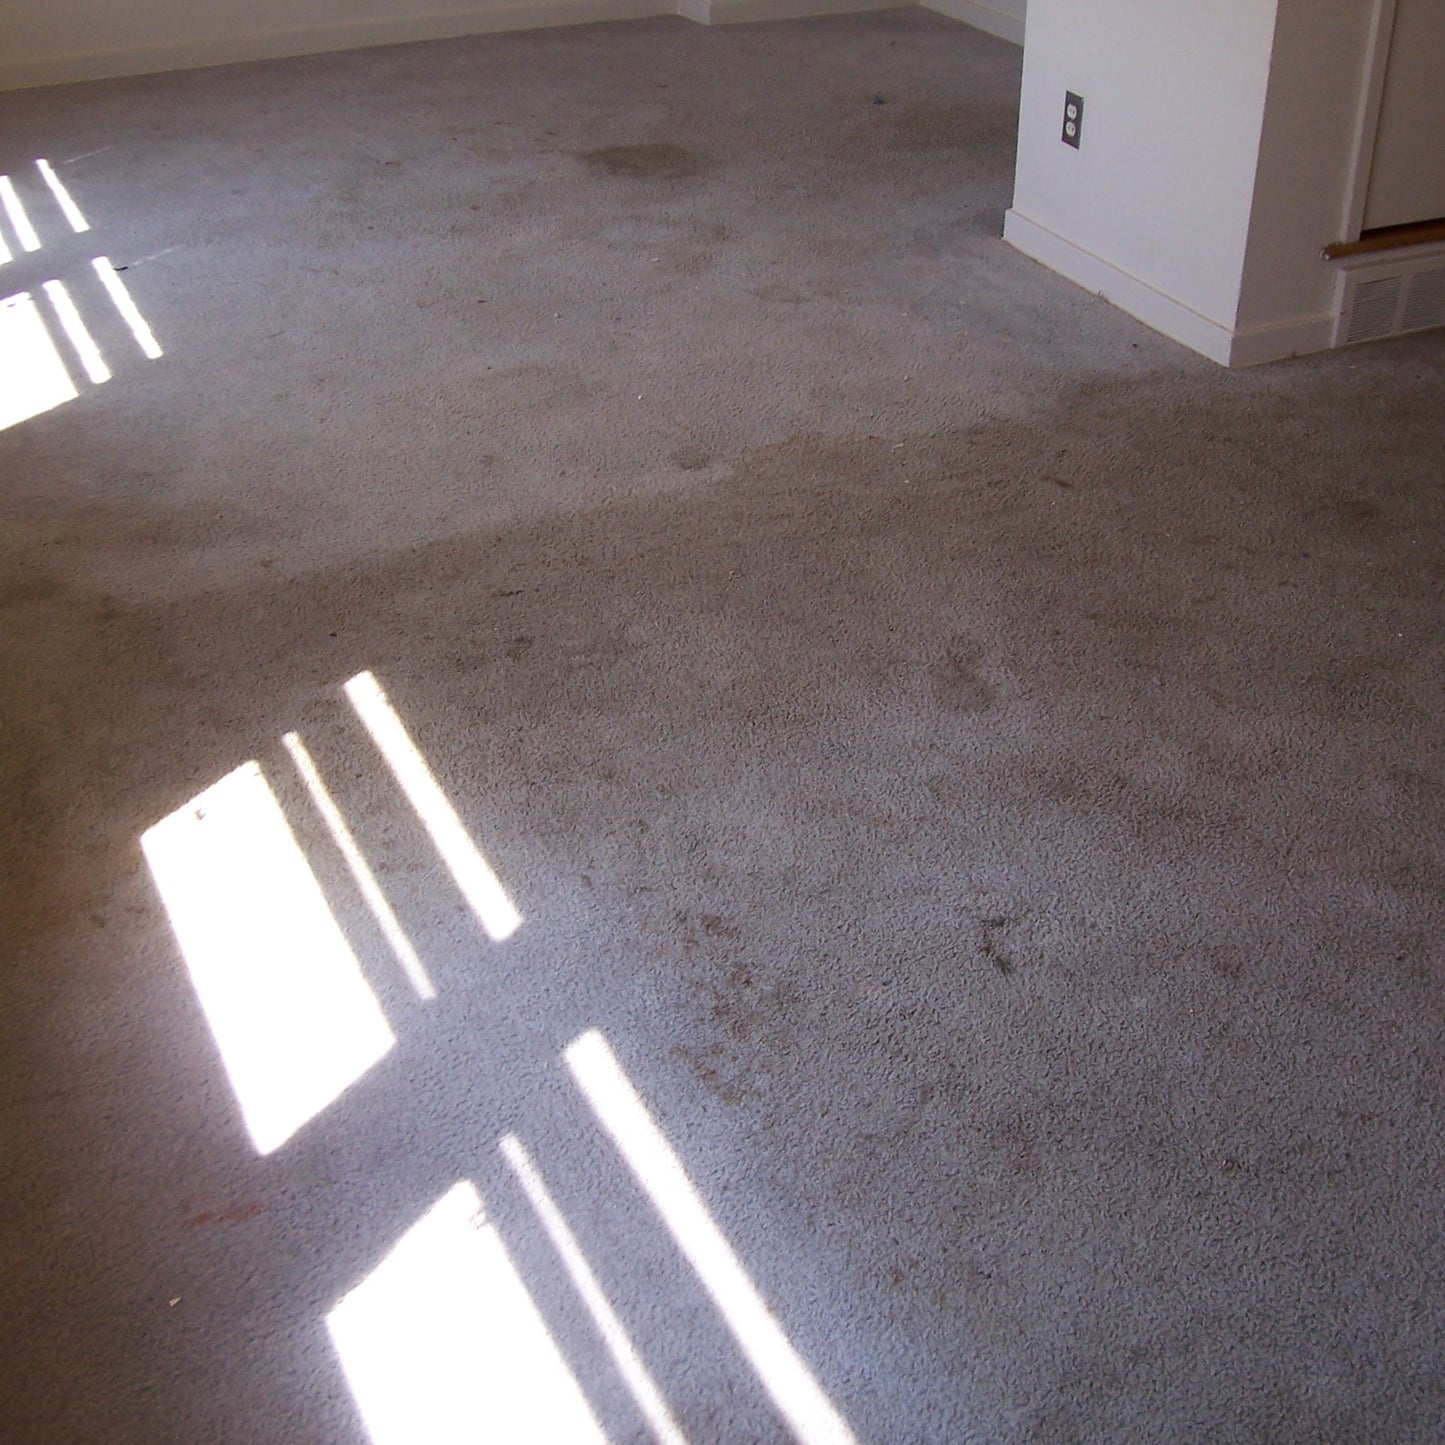 Carpet Cleaning Business Package